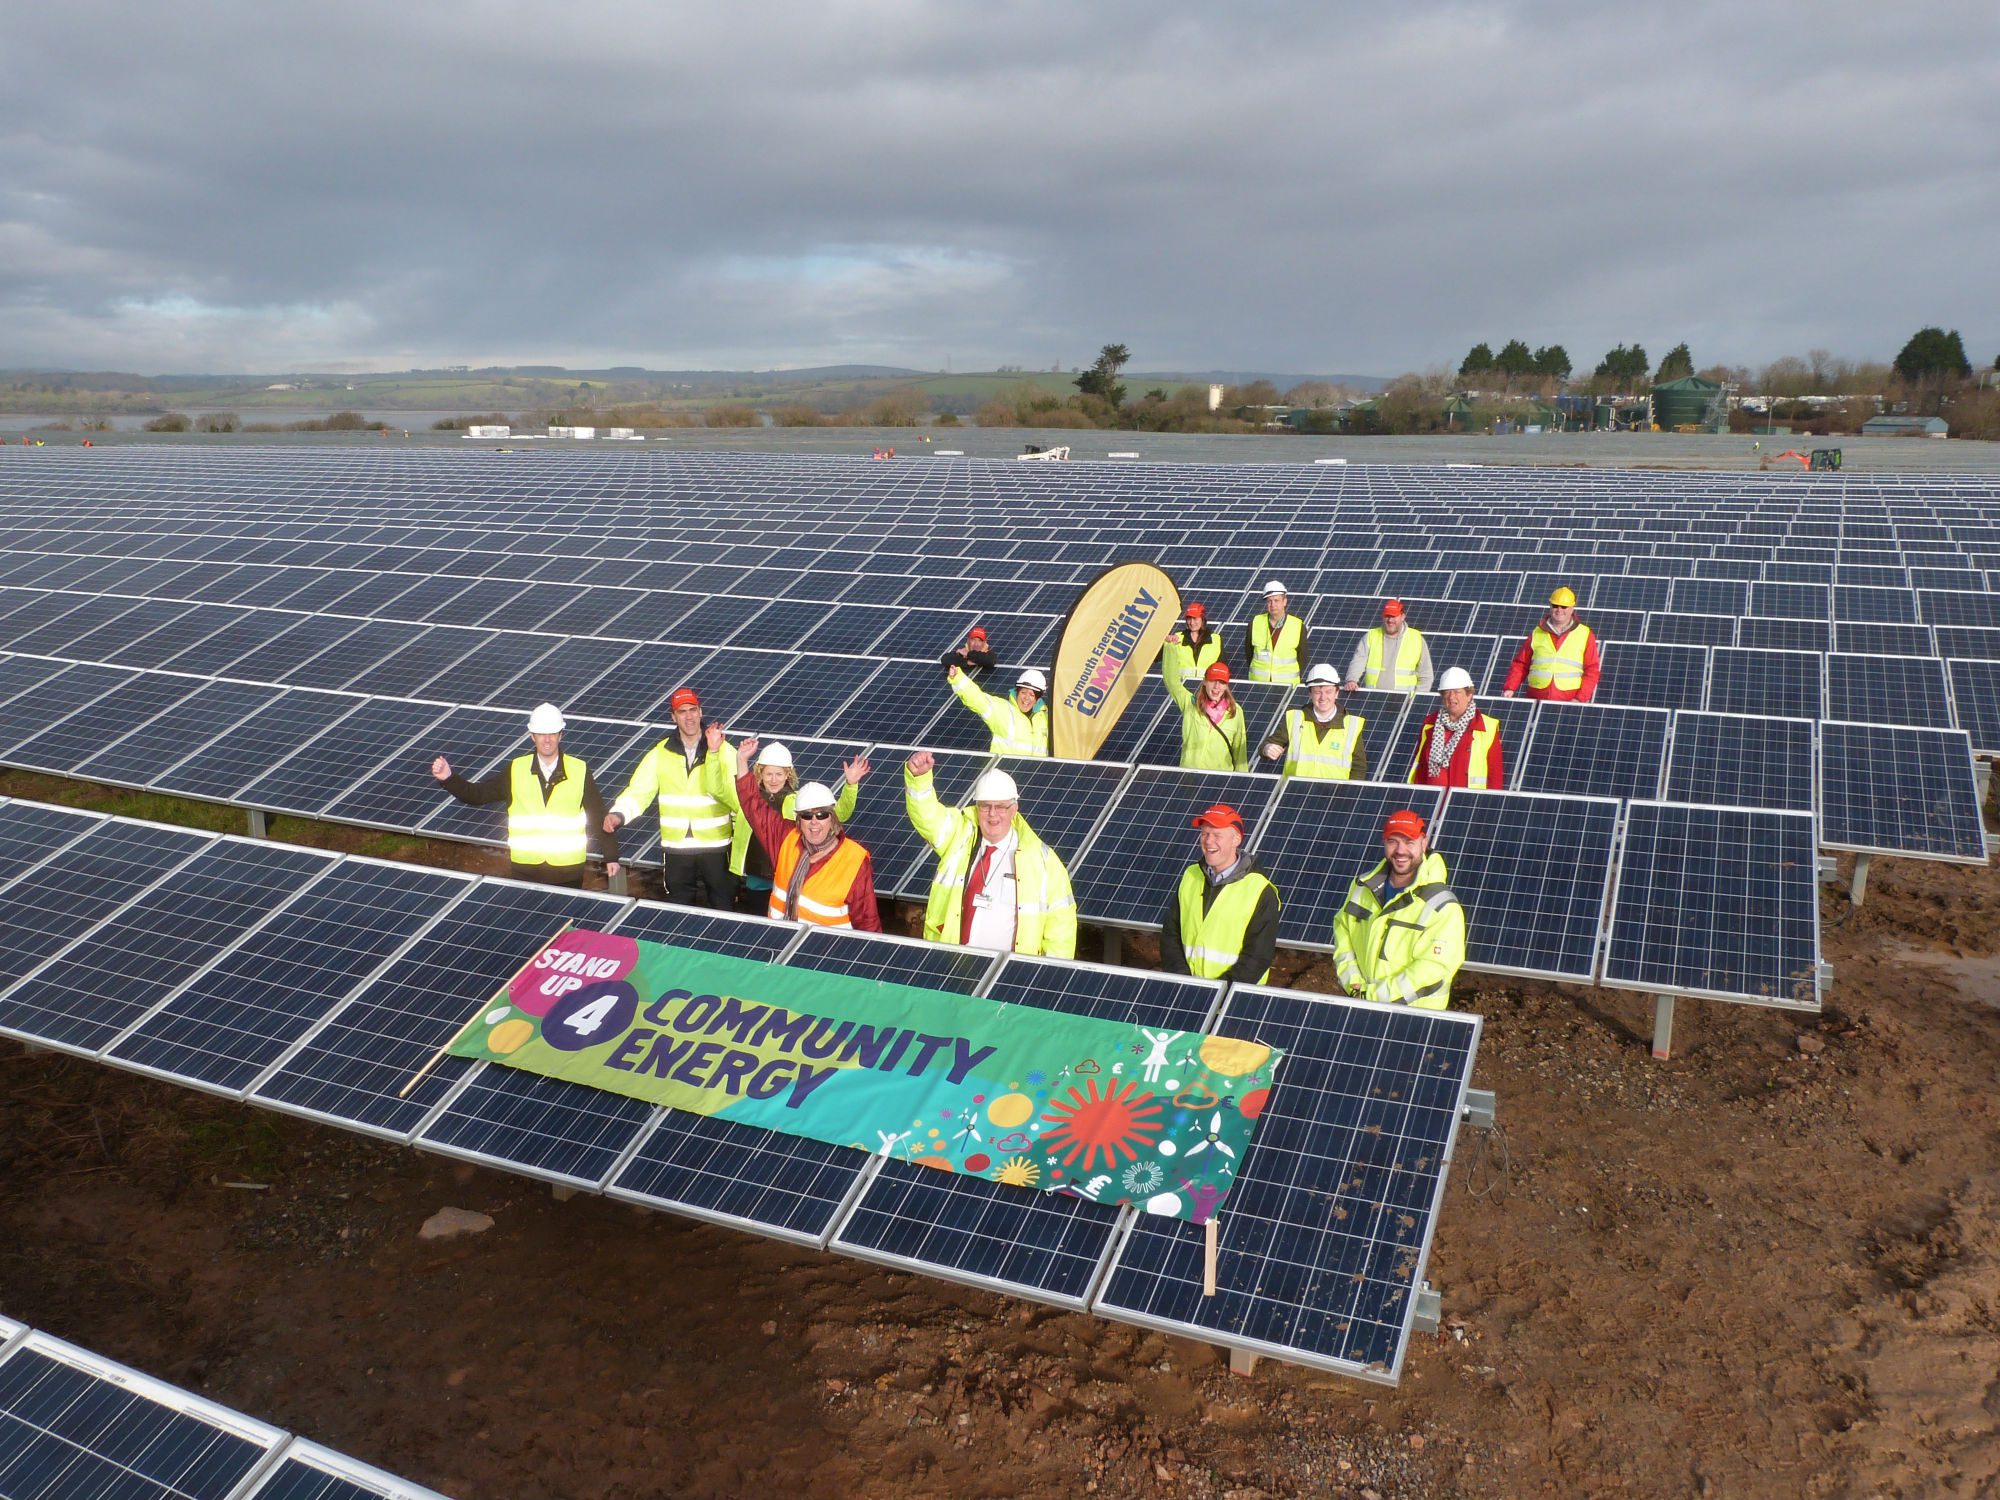 People powered – building a fairer energy system